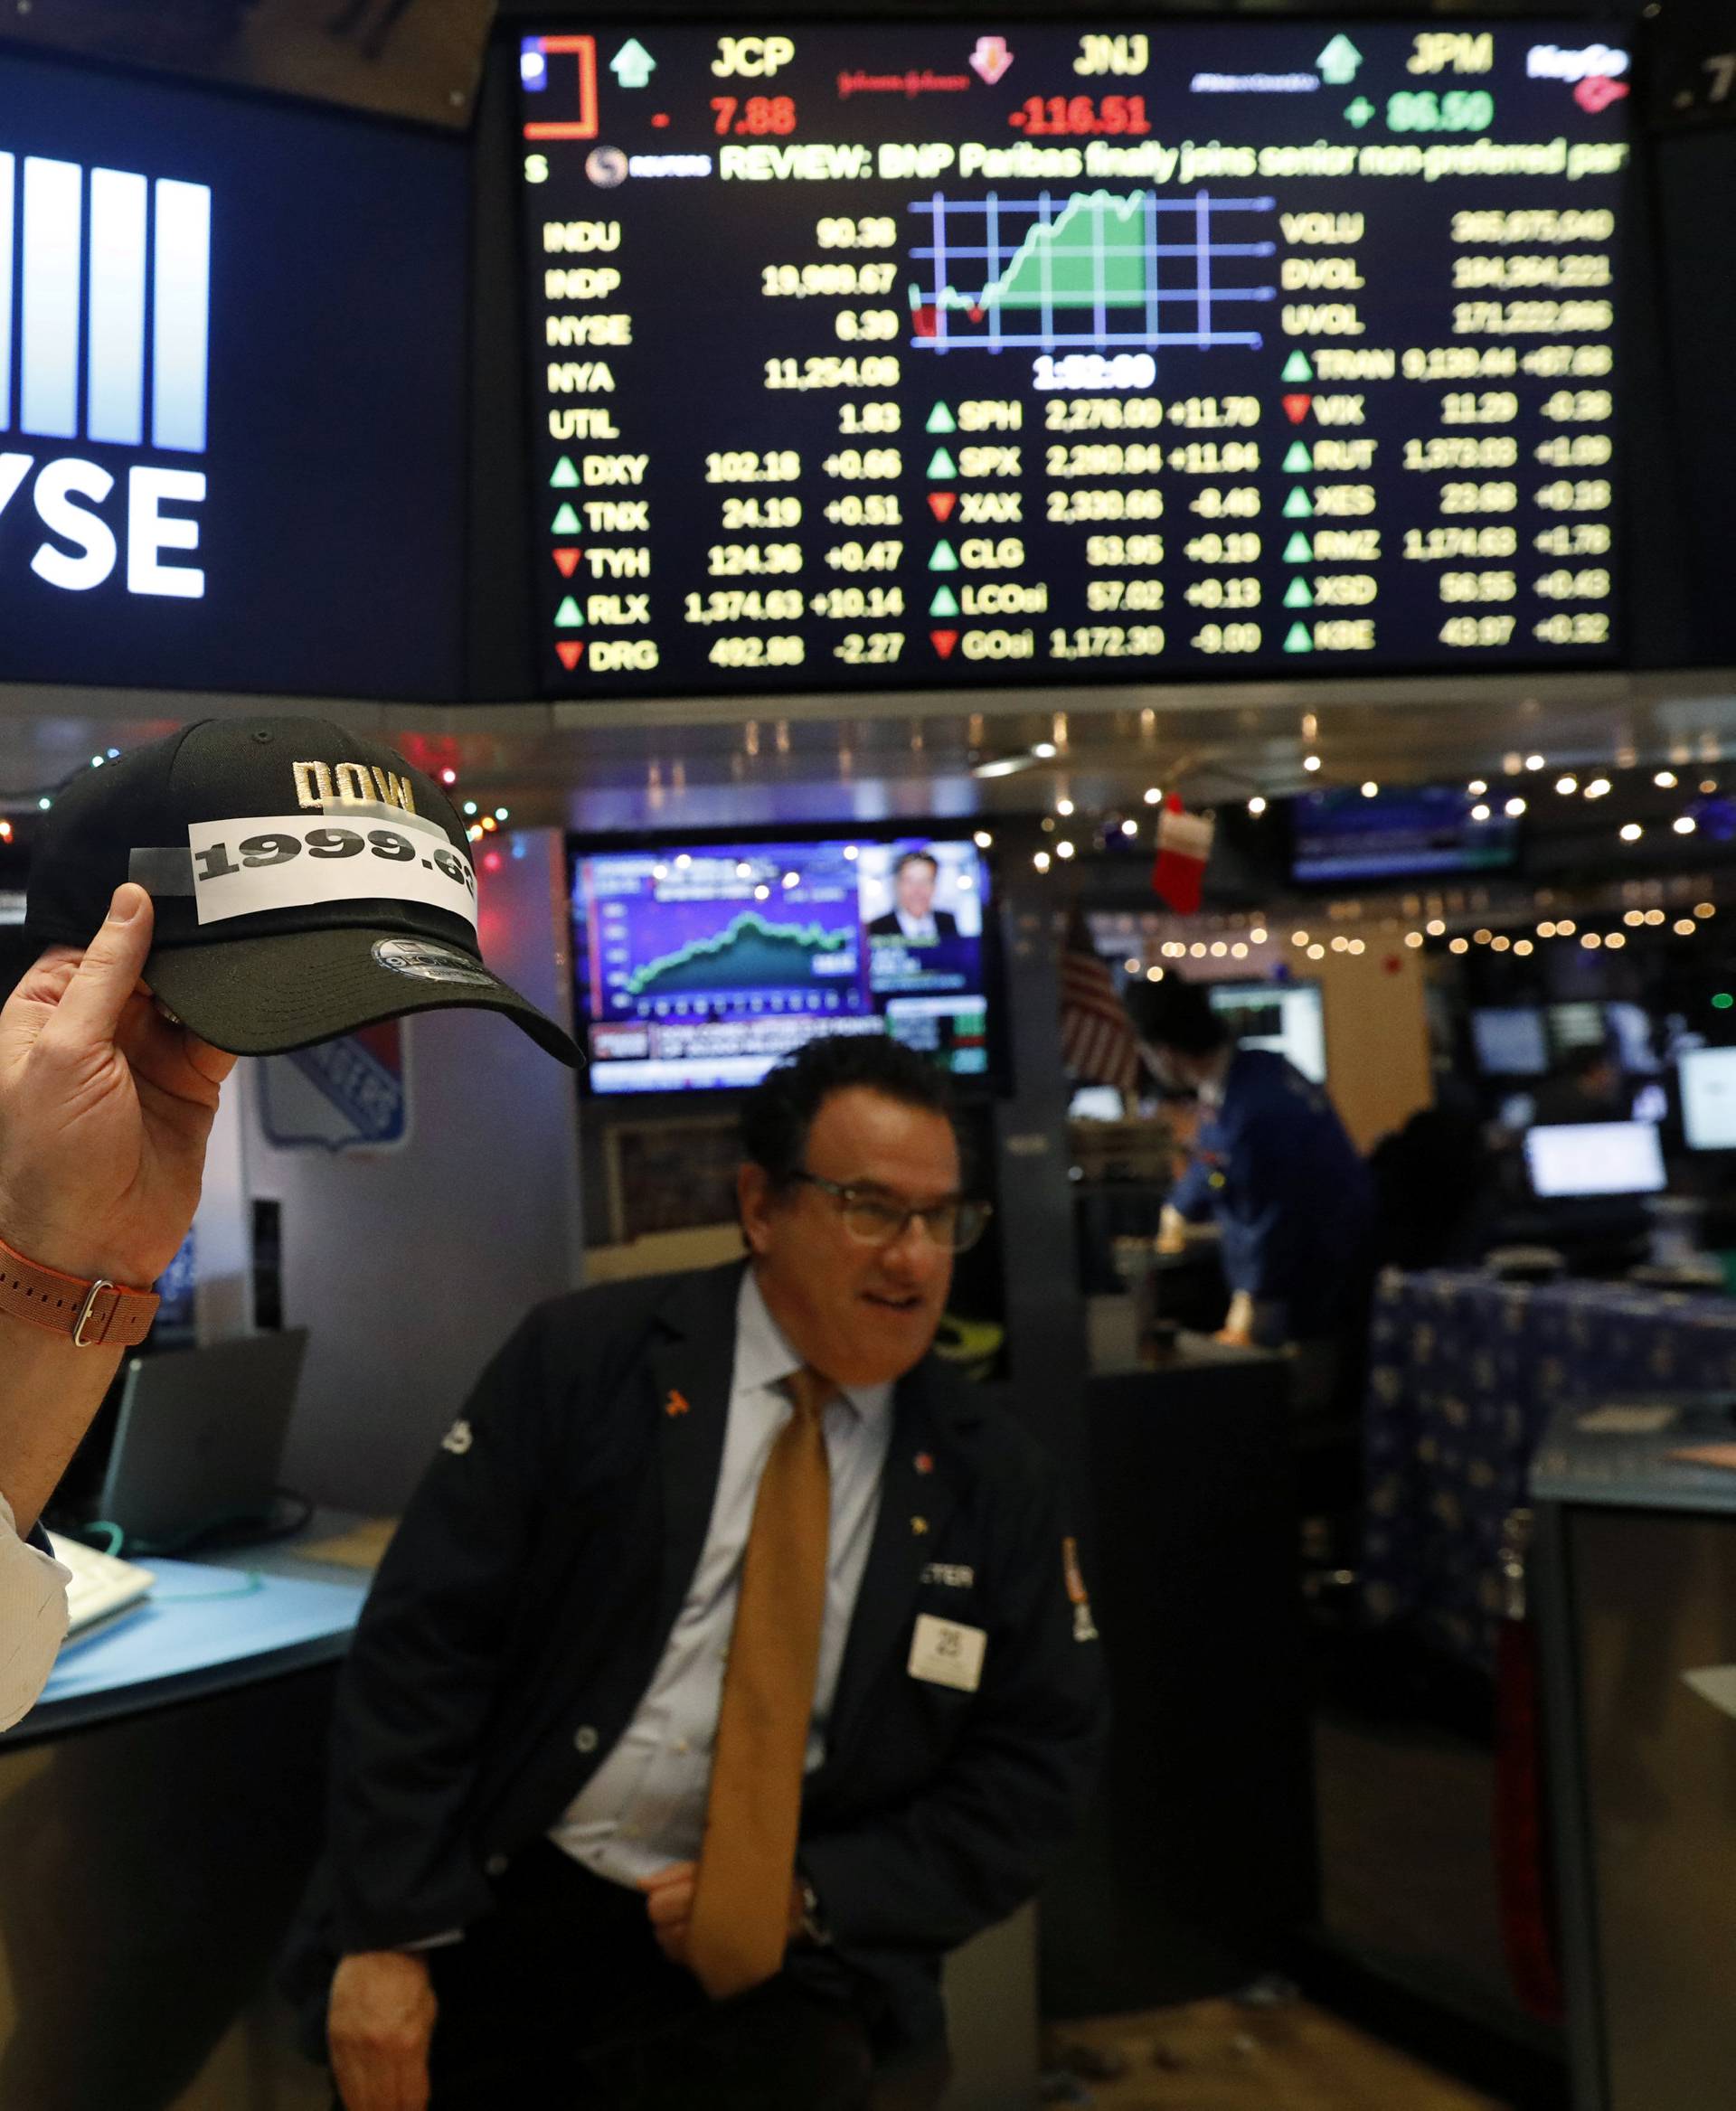 A trader laughs as he holds a hat at NYSE